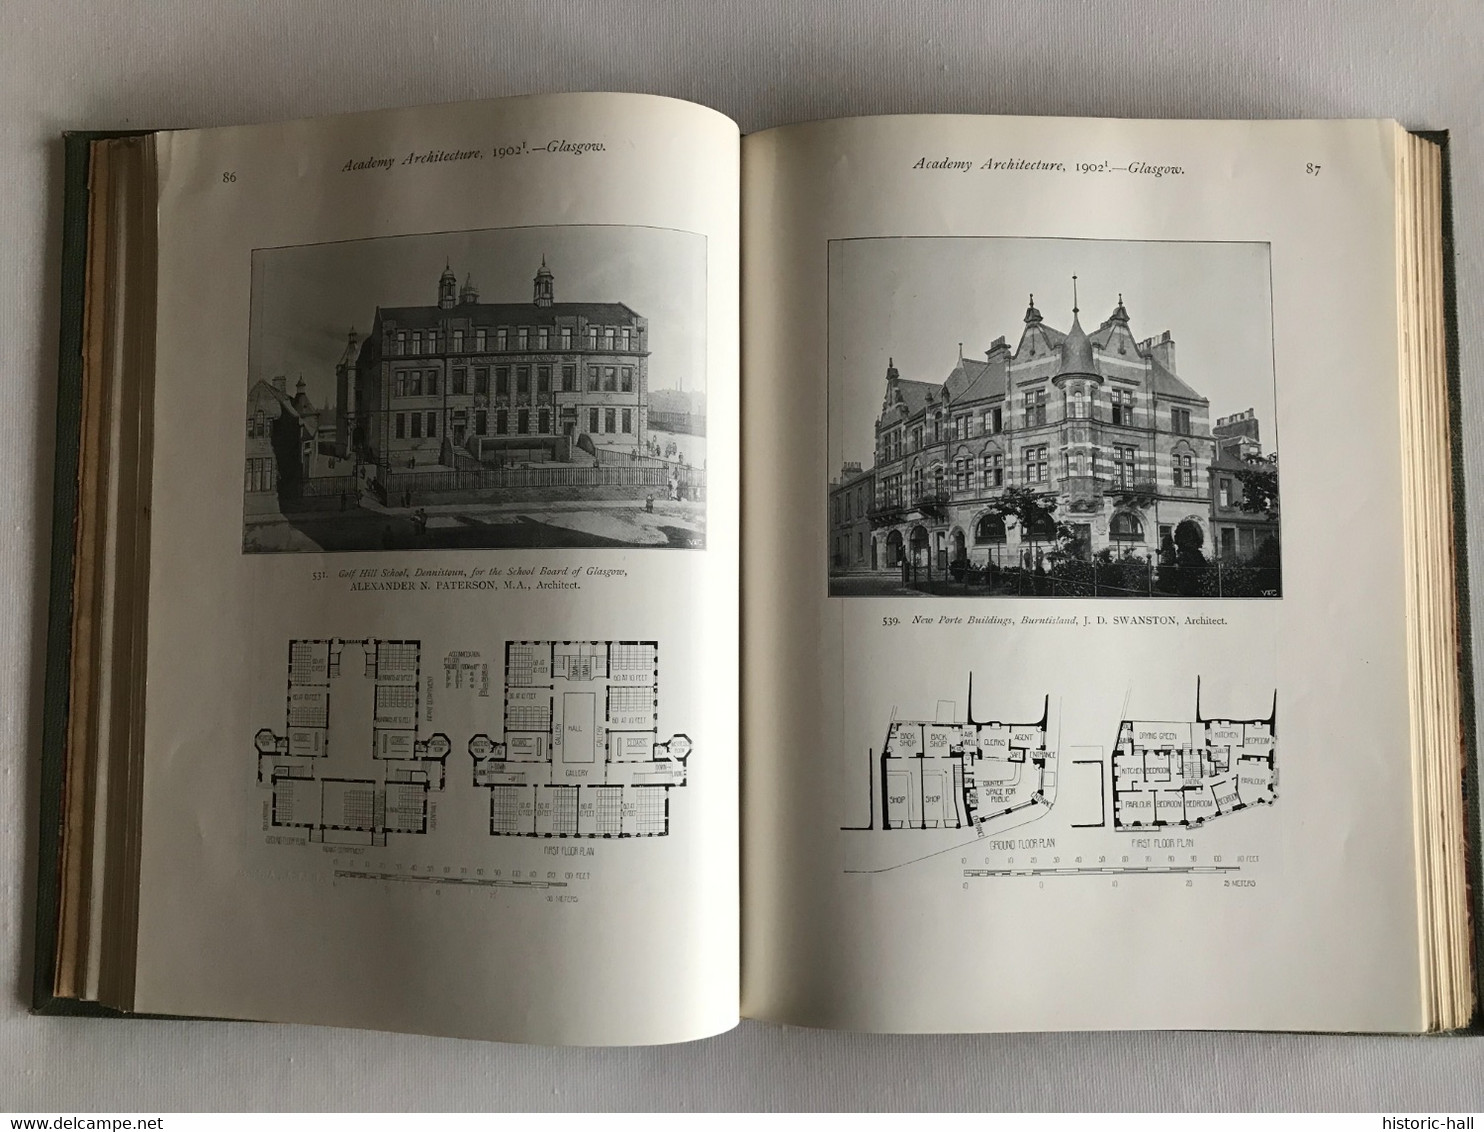 ACADEMY ARCHITECTURE & Architectural Review - vol 21 & 22 - 1902 - Alexander KOCH